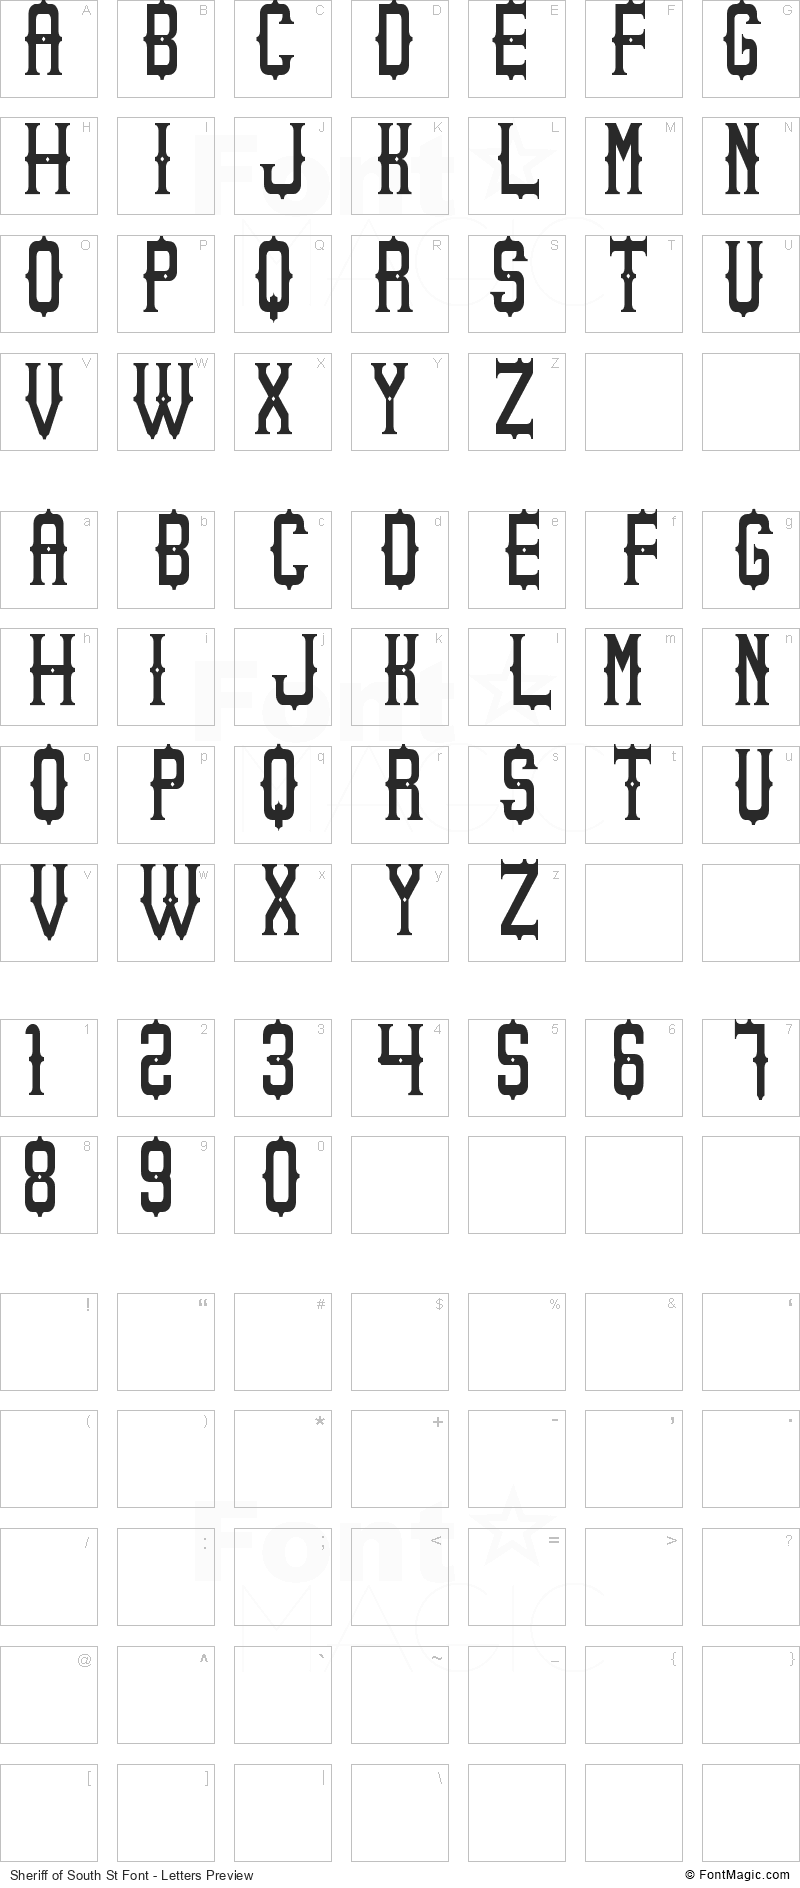 Sheriff of South St Font - All Latters Preview Chart